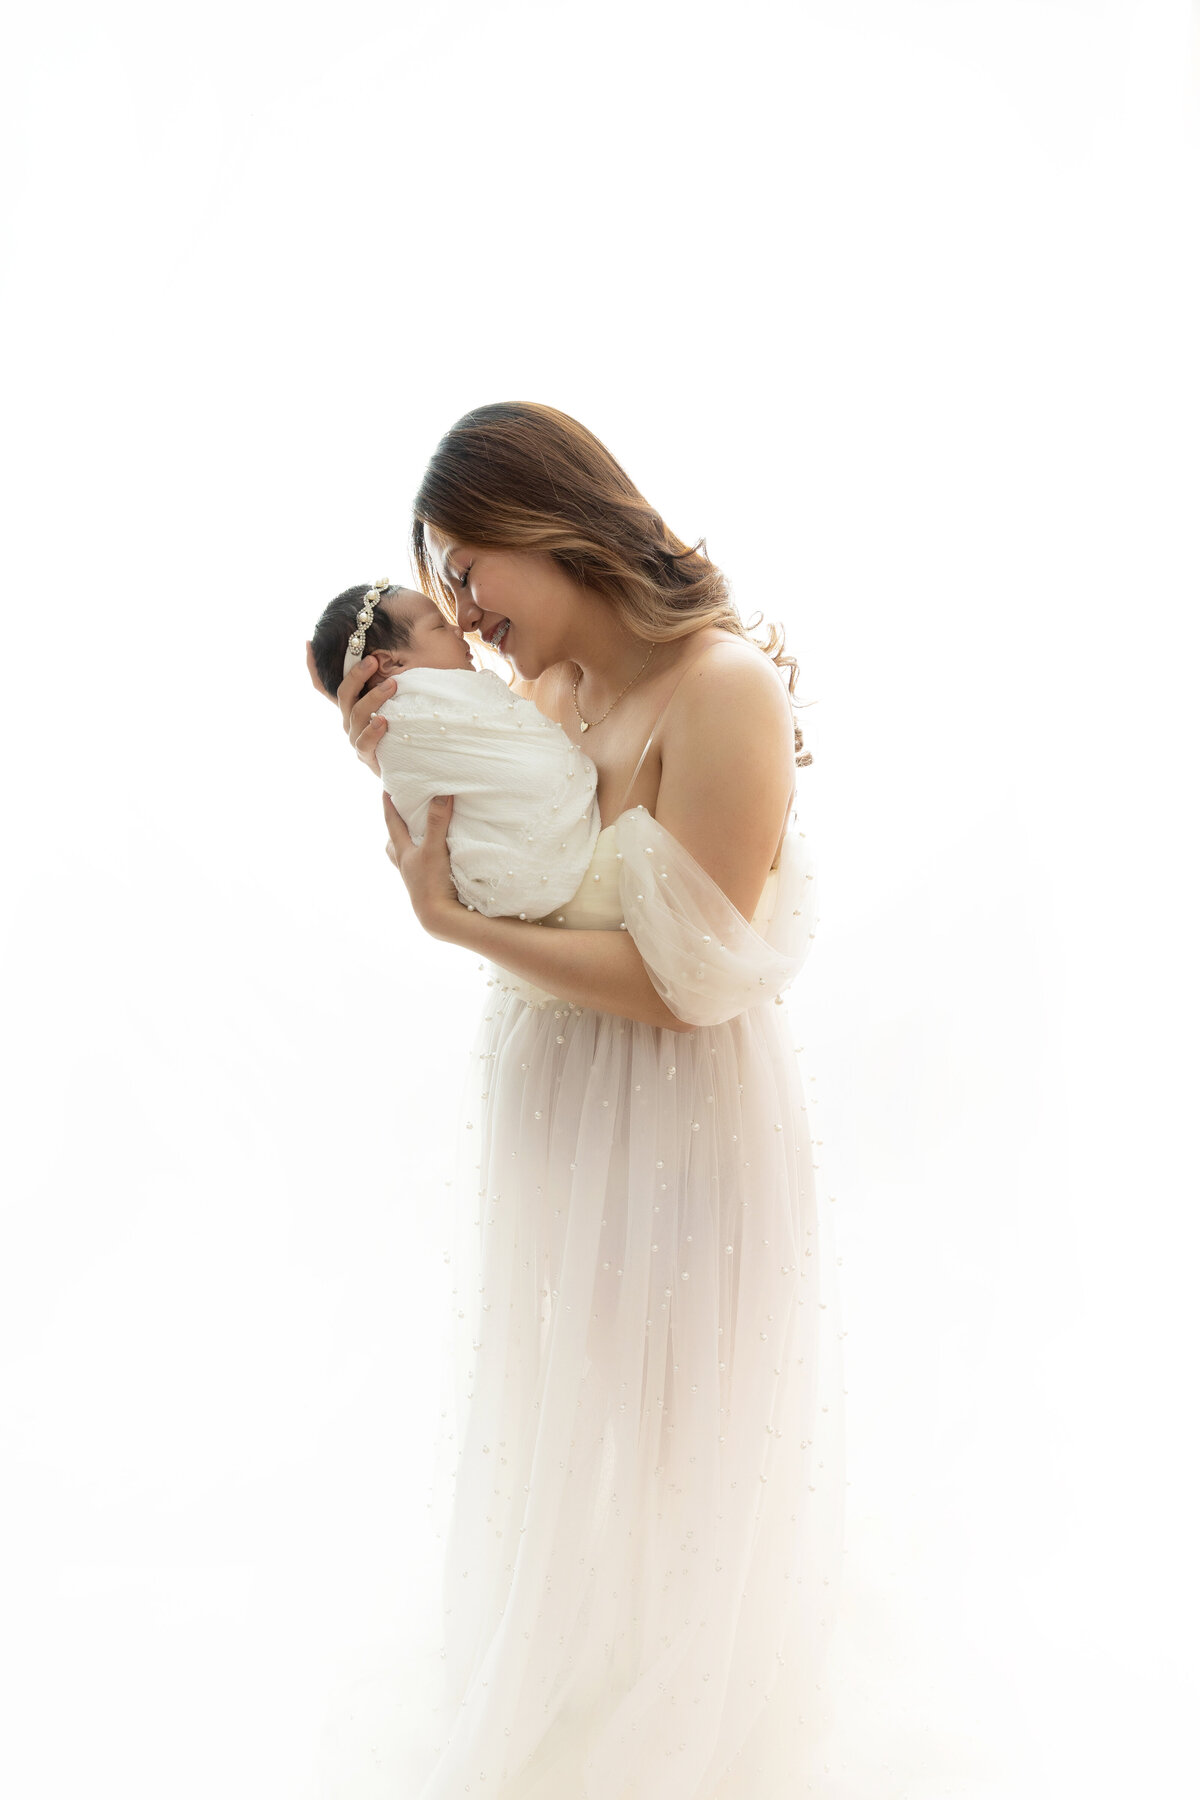 A happy mother nuzzles noses with her sleeping newborn baby daughter while standing in a studio in a white dress